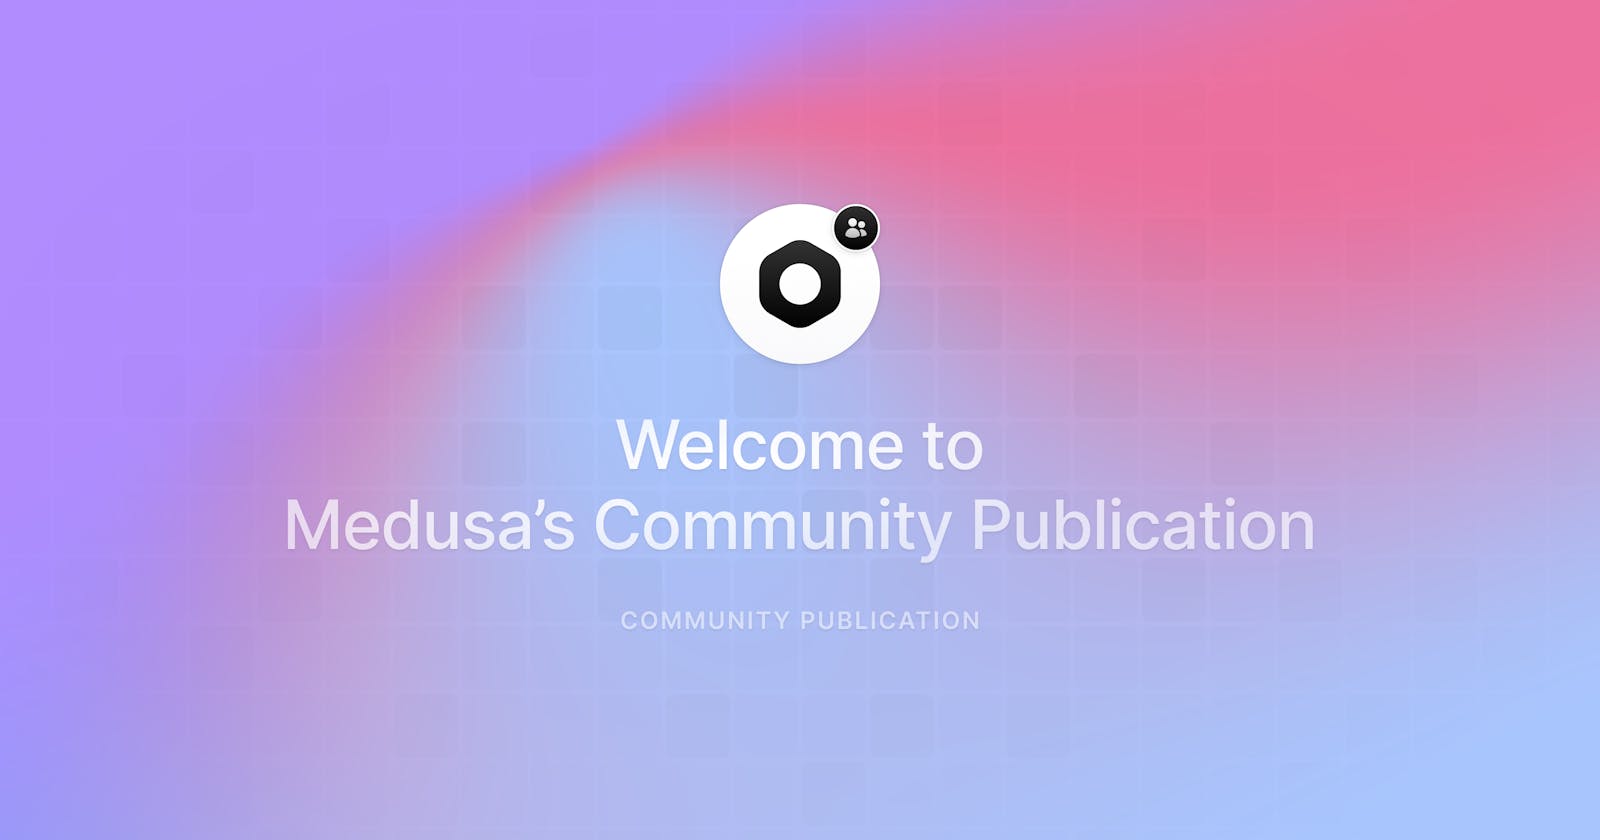 Welcome to Medusa’s Community Publication